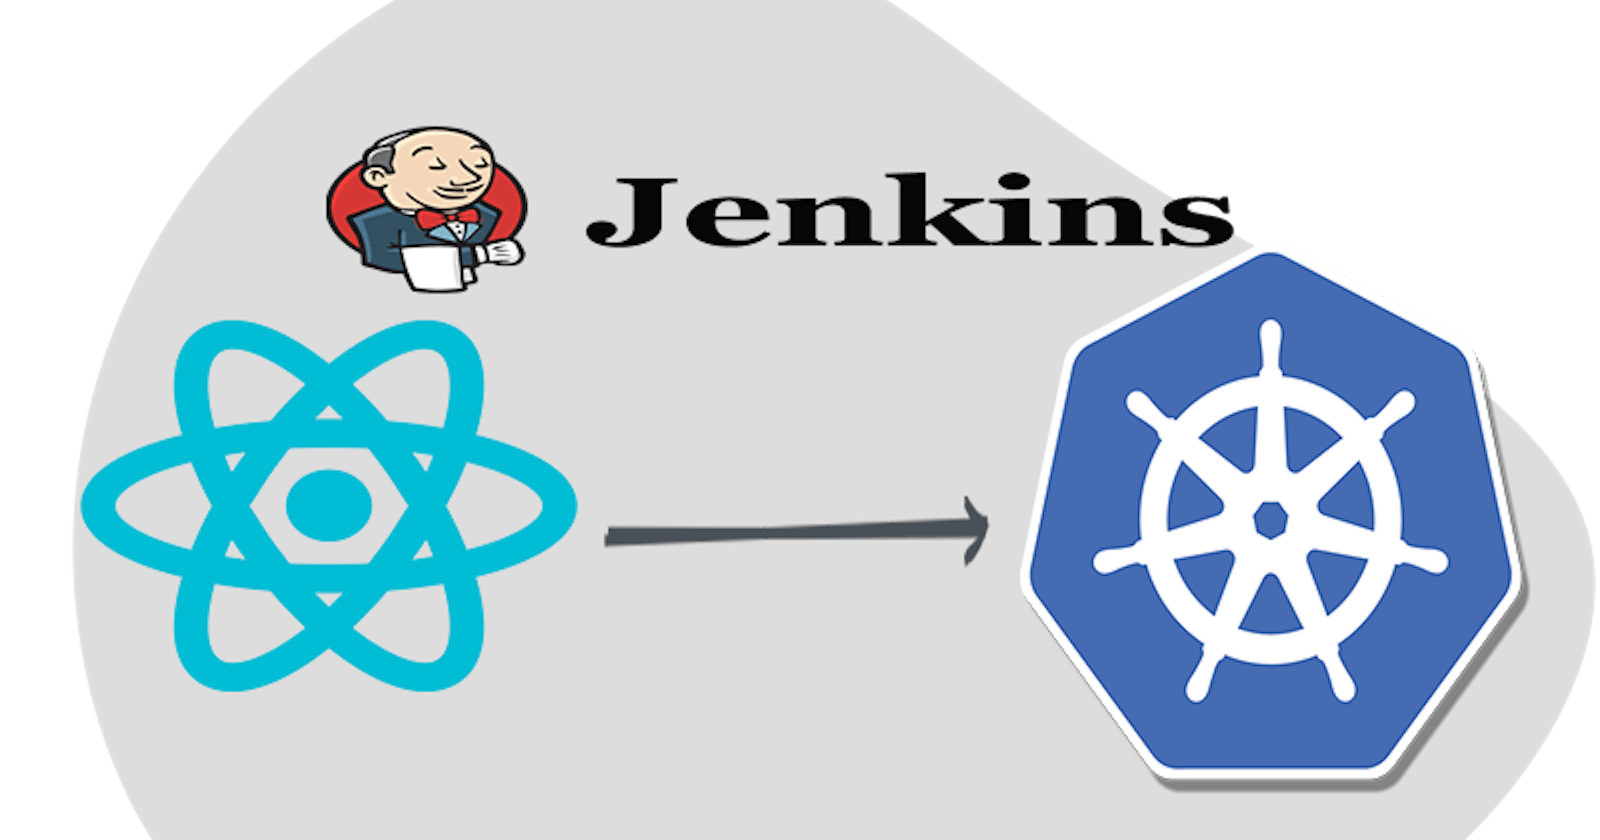 Deploy a REACT app with Flask API backend on Kubernetes Cluster - Part 1